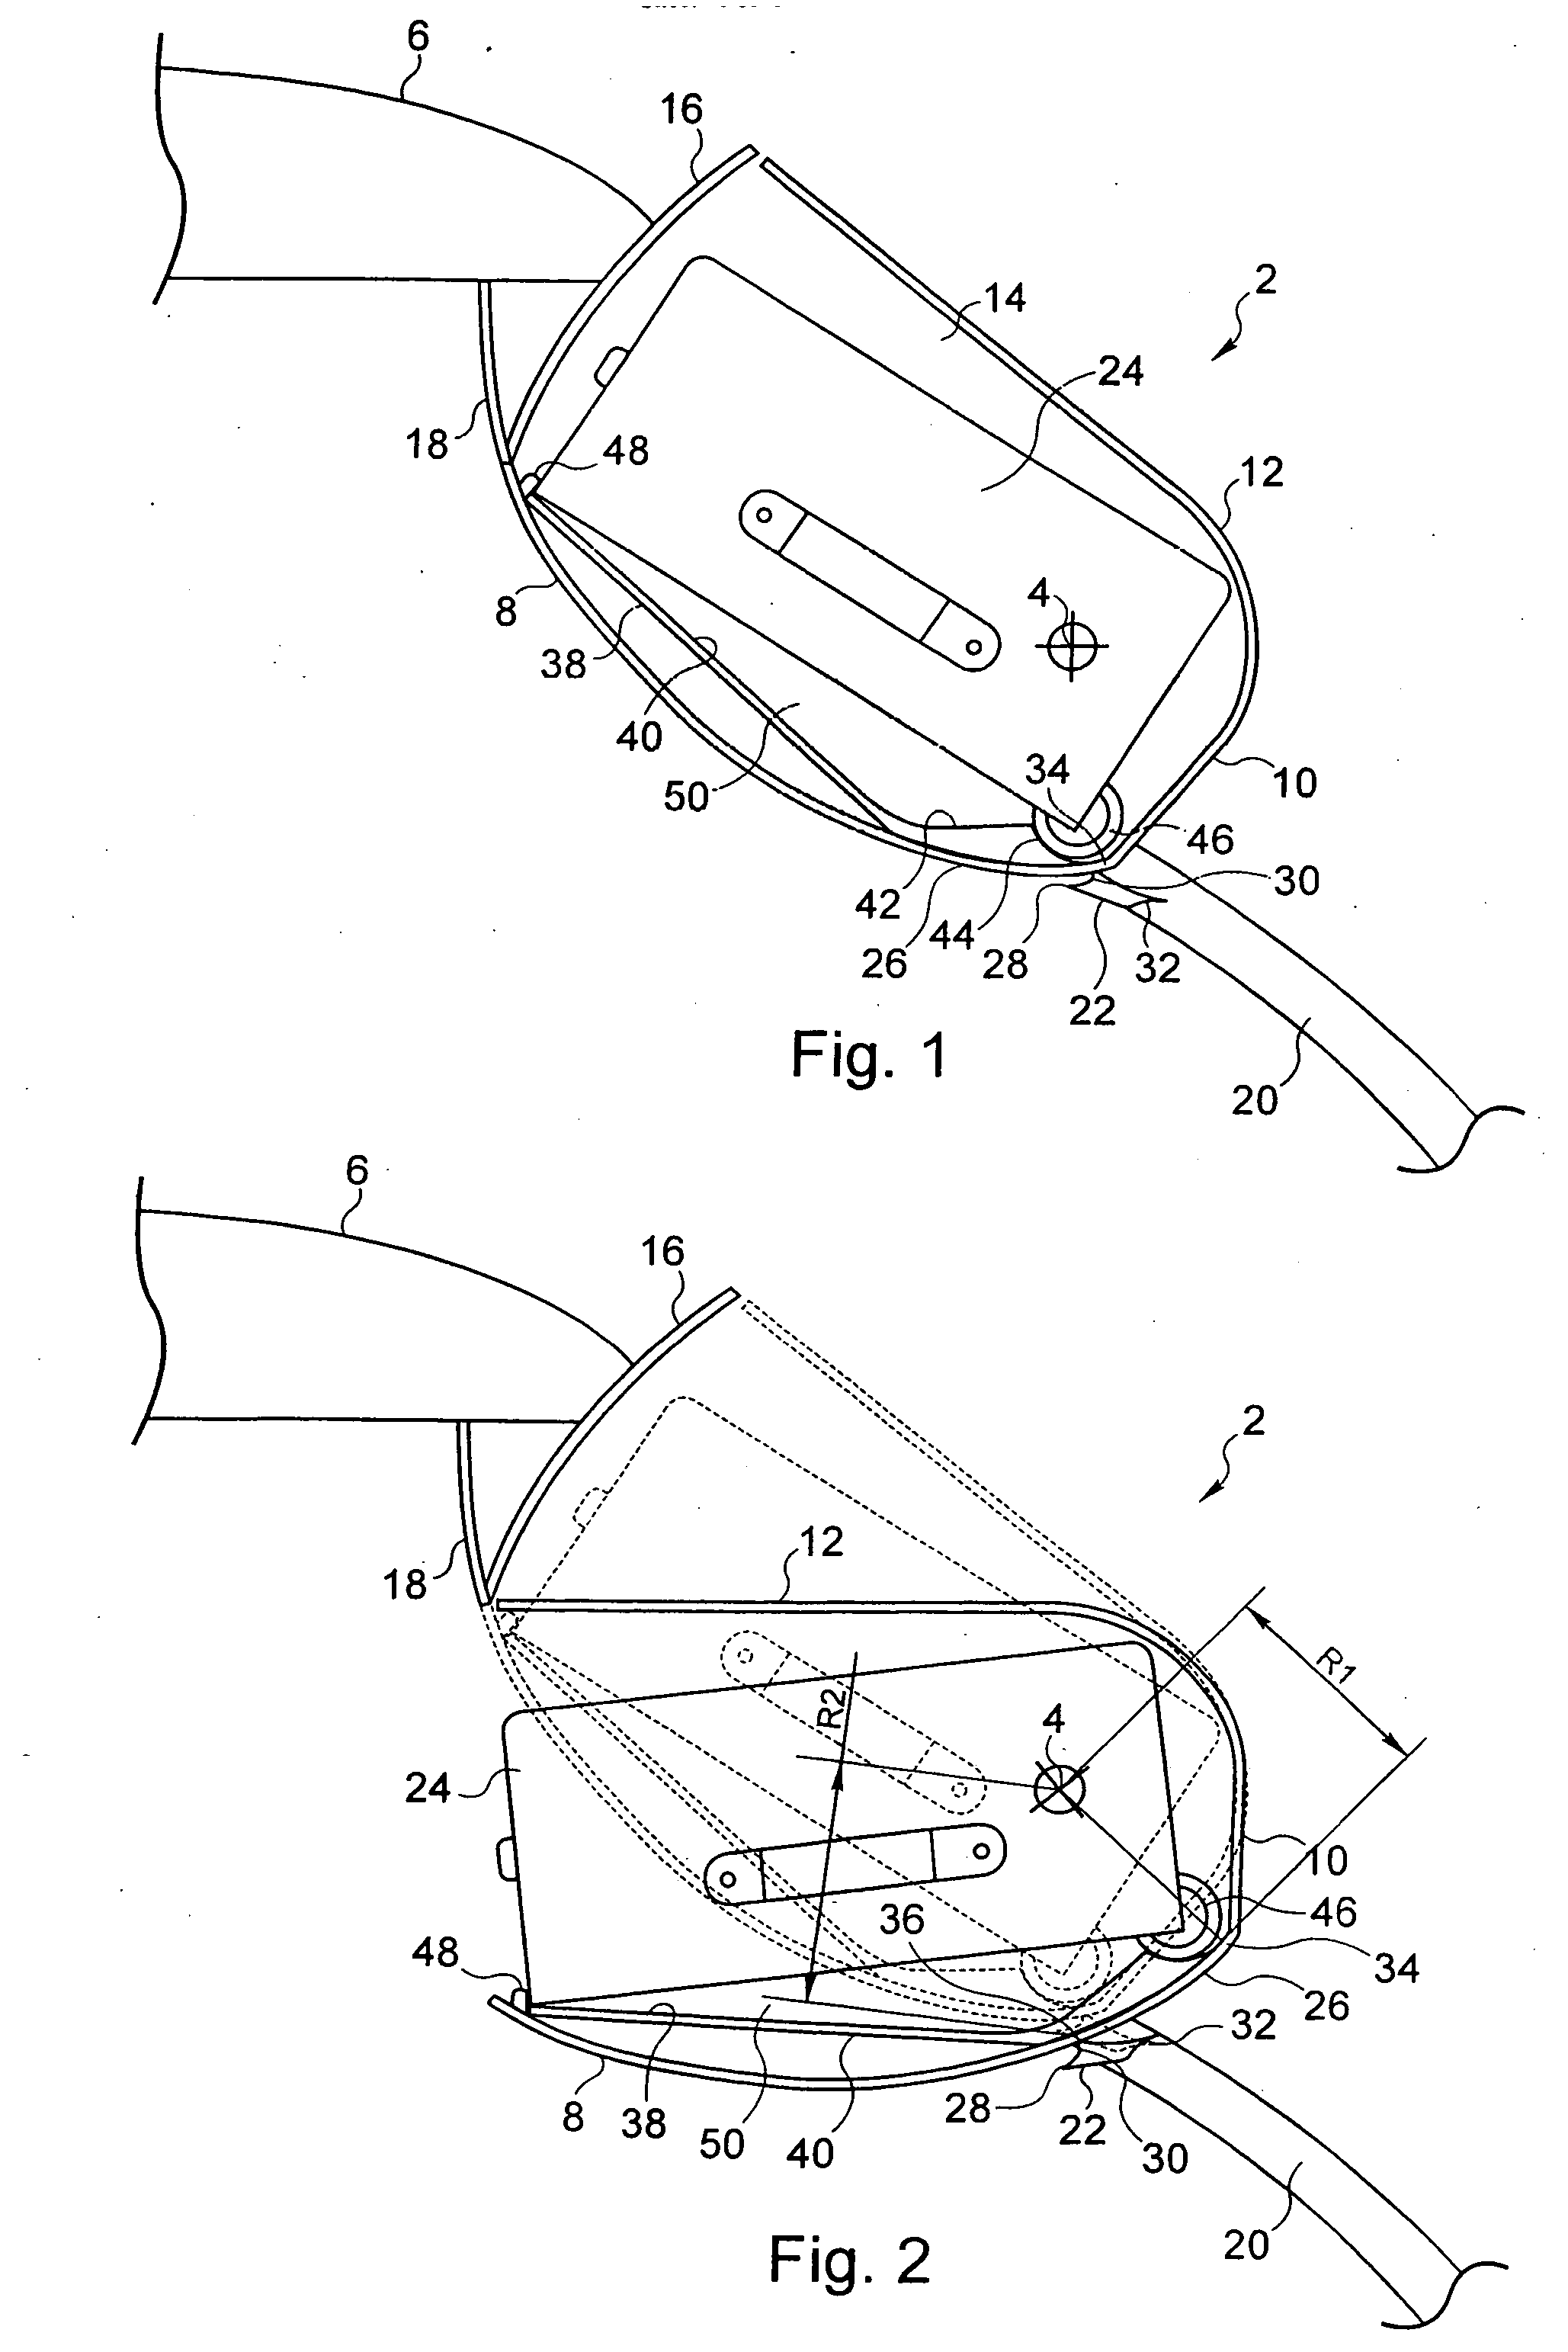 Pivoting baggage rack intended for an aircraft cabin